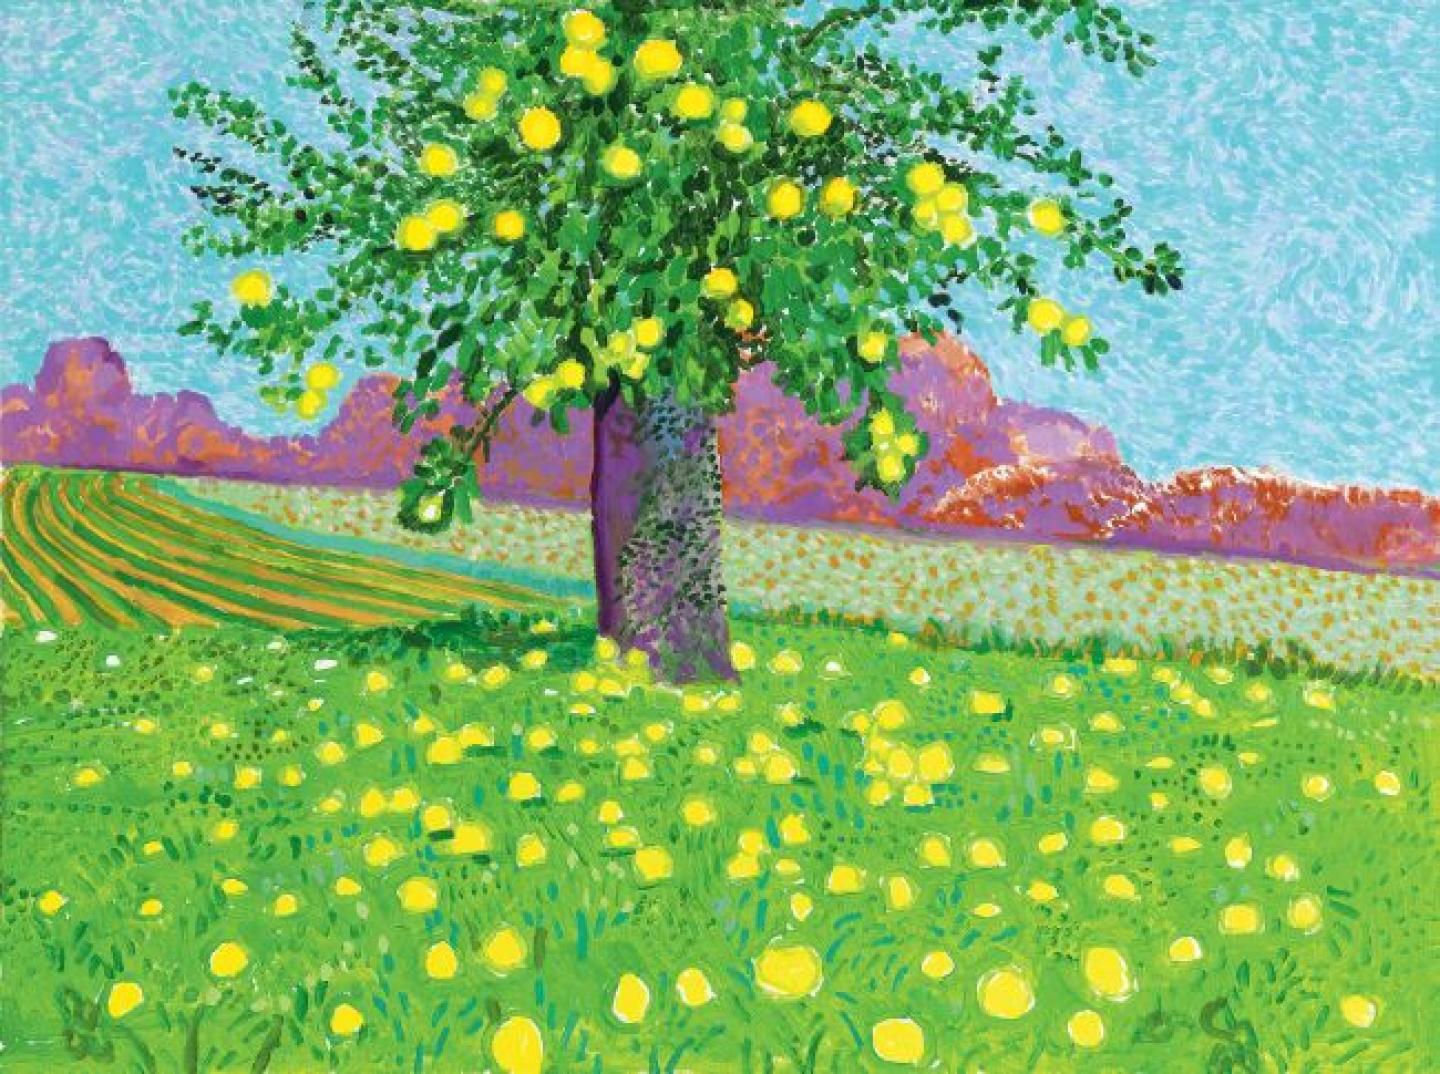 Apples on Tree and Ground, David Hockney, Acrylique sur toile, 201991 x 122 cm, ©Galerie Lelong & Co